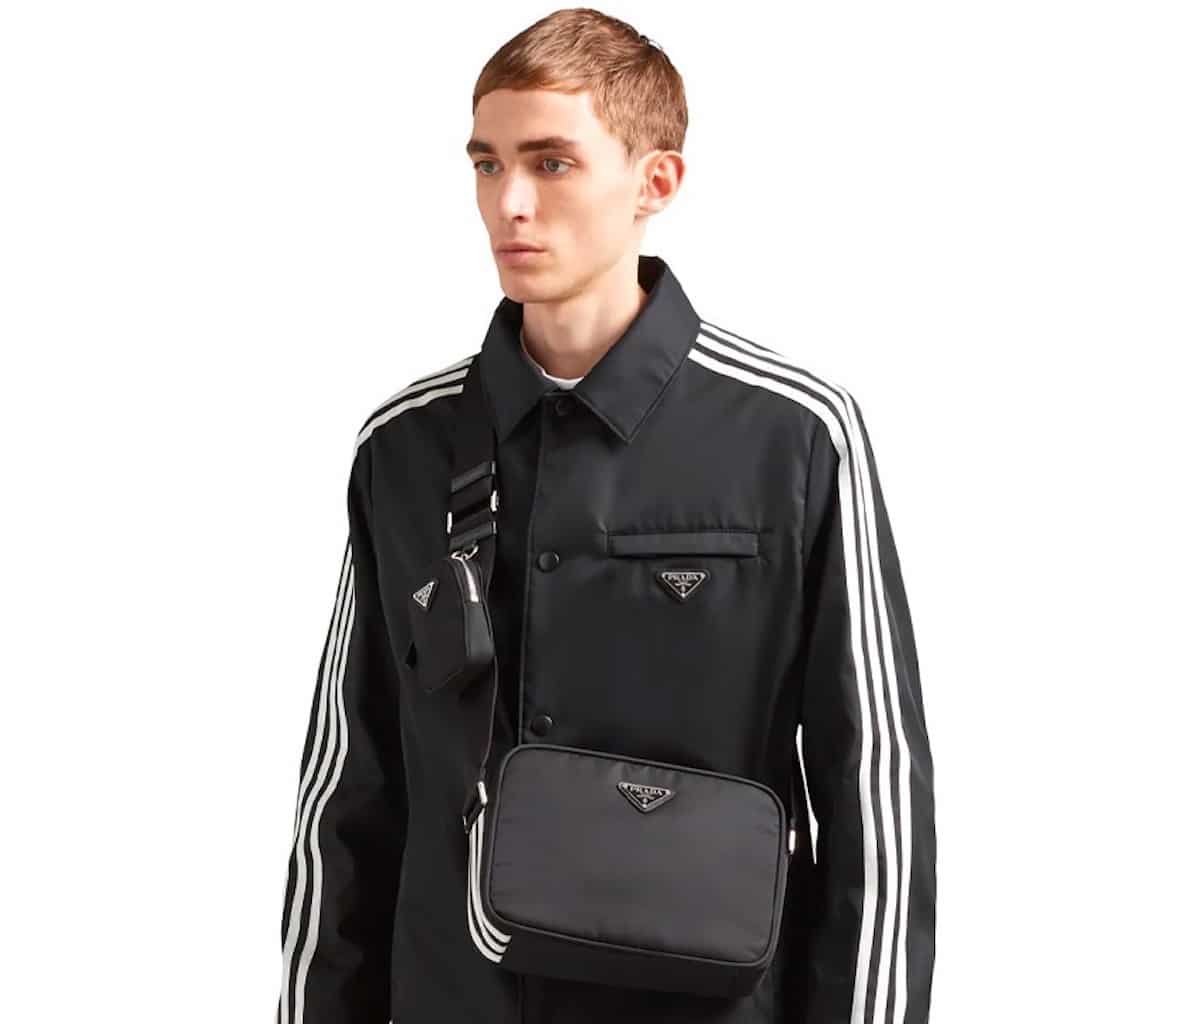 Prada x Adidas unveils the bags and accessories that make up its